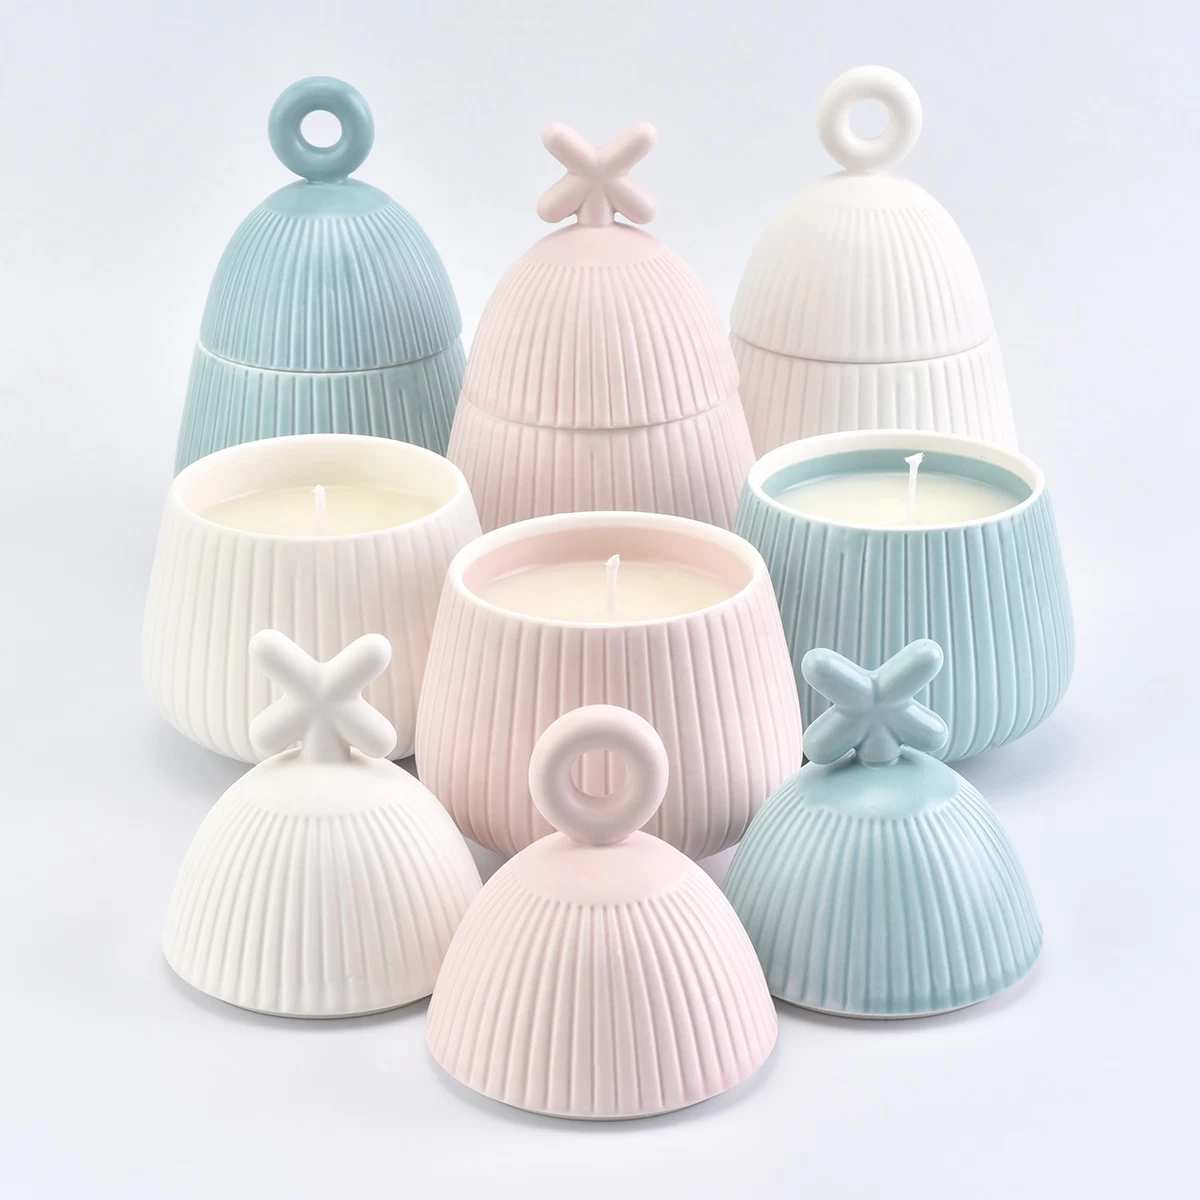 8oz 10oz Popular cute porcelain ceramic candle holders with lid